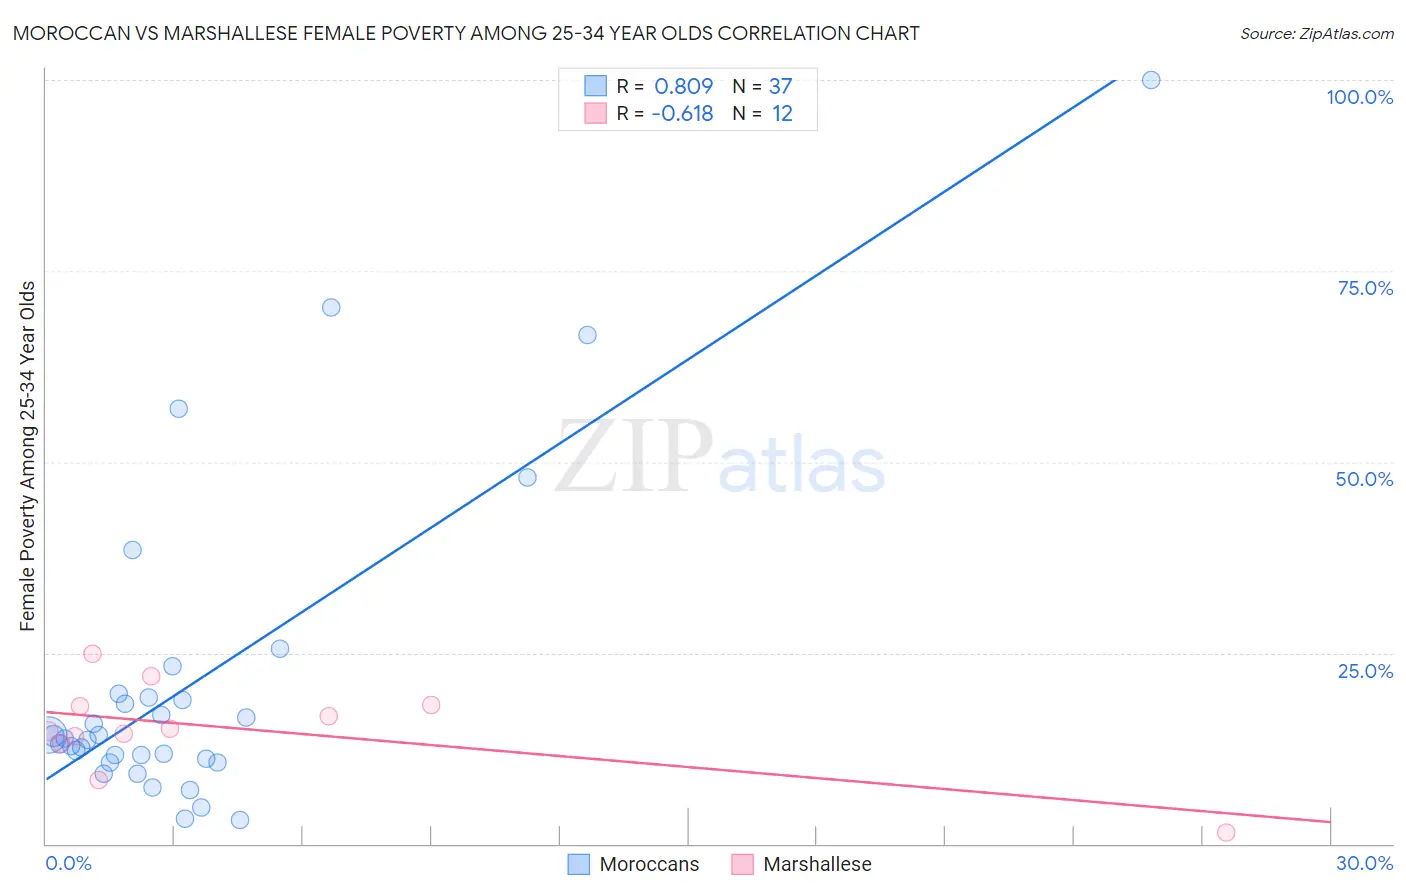 Moroccan vs Marshallese Female Poverty Among 25-34 Year Olds